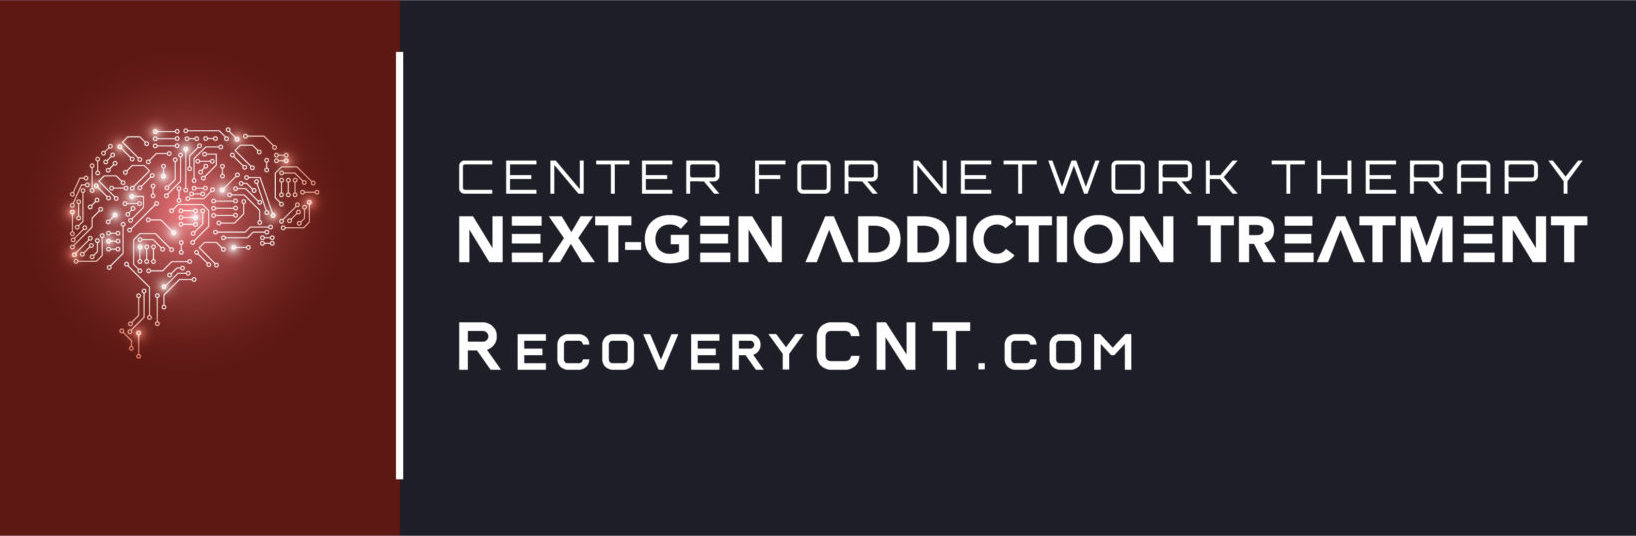 cropped-Recoverycnt-new-logo-scaled-1.jpg